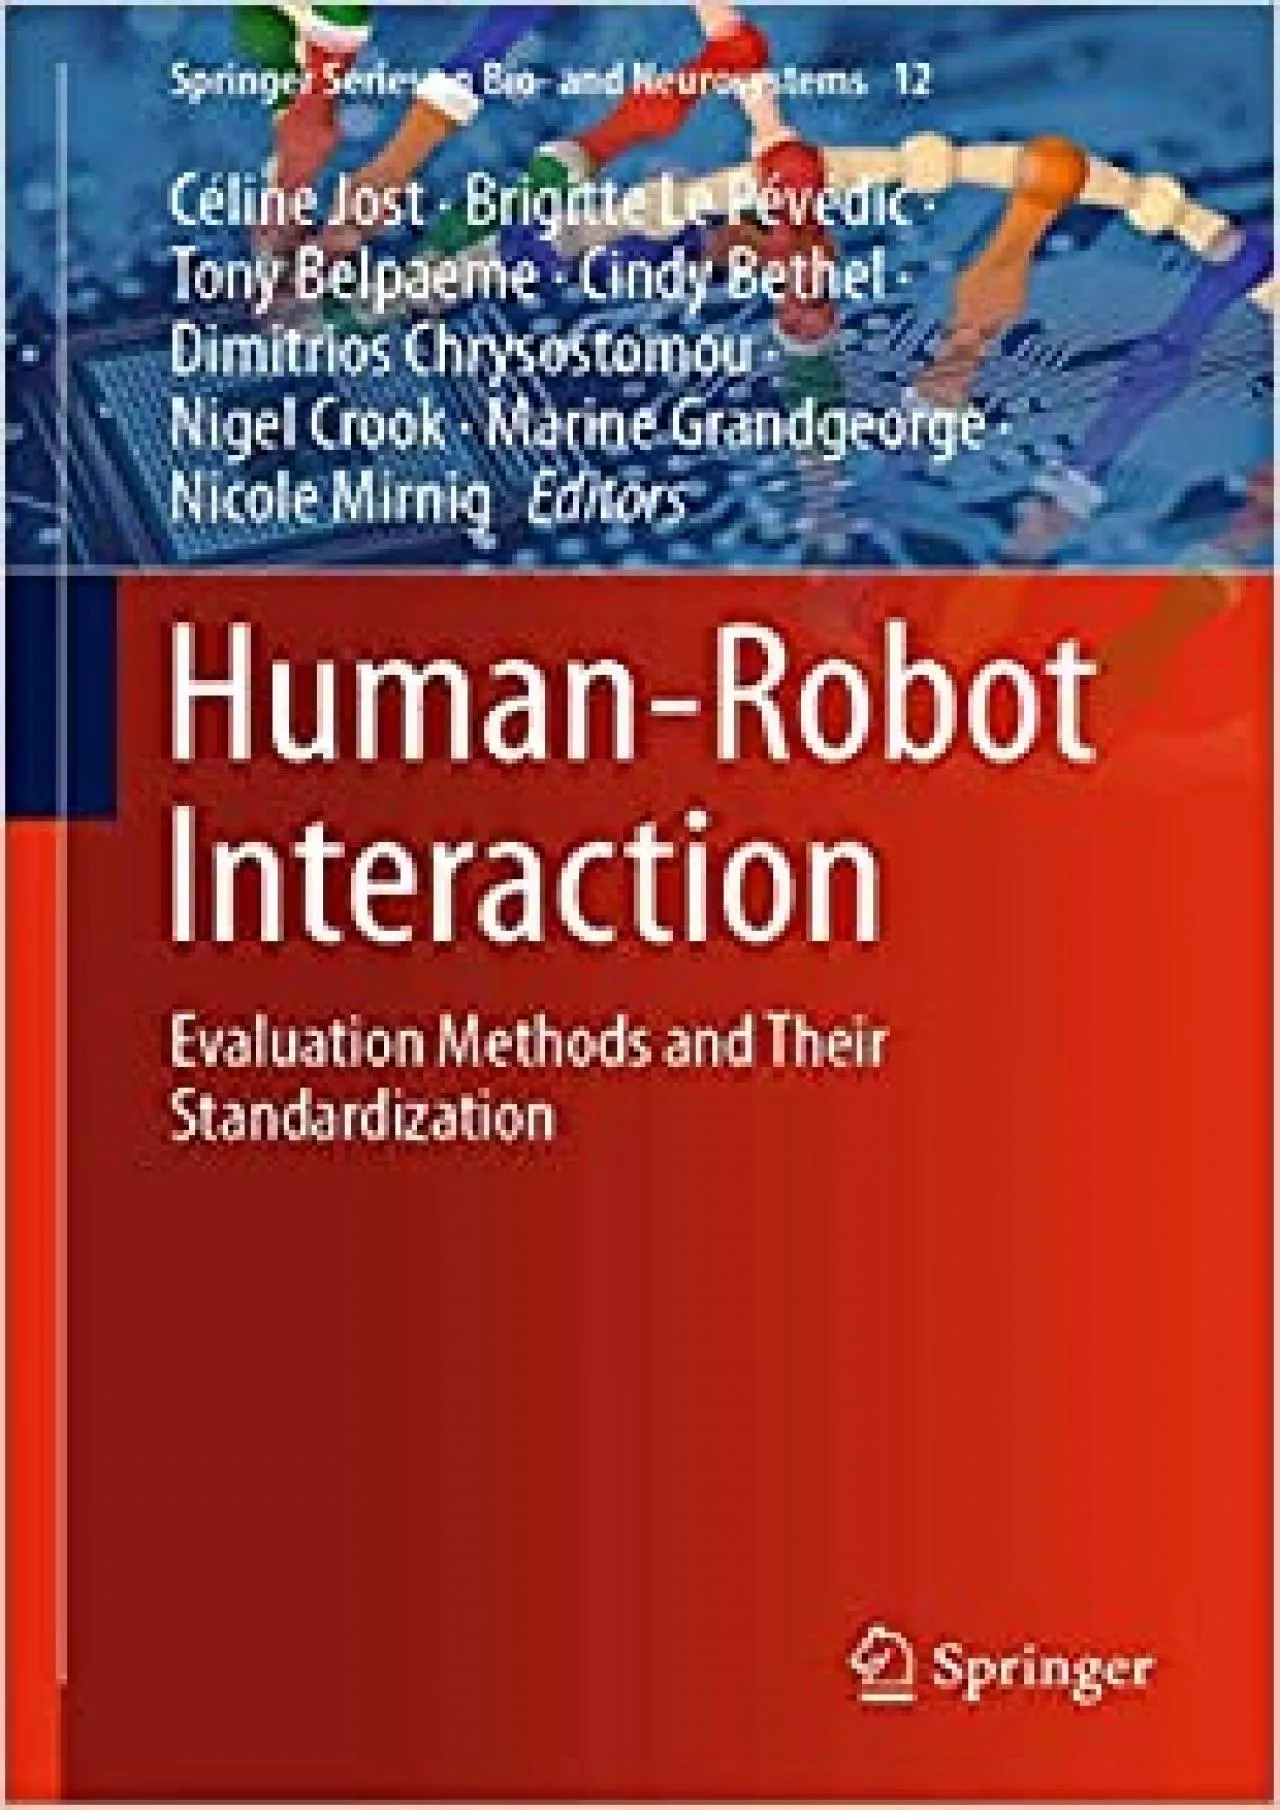 (BOOK)-Human-Robot Interaction Evaluation Methods and Their Standardization (Springer